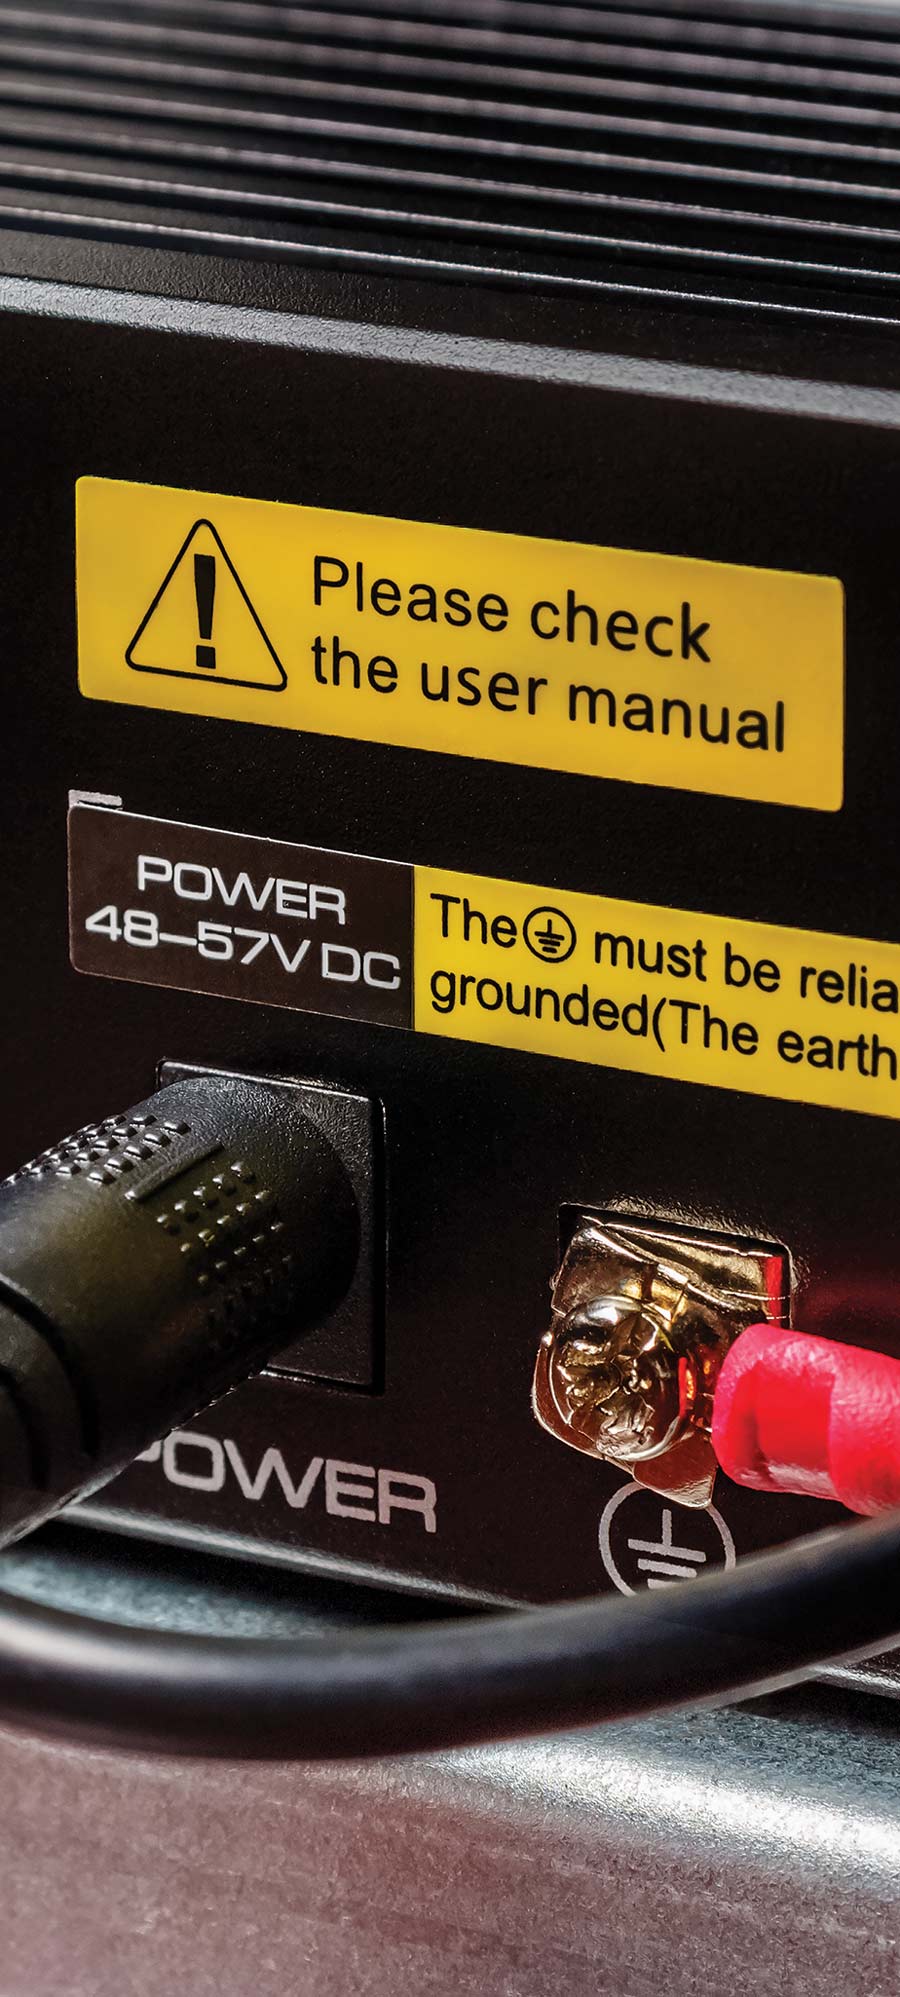 Electrical component with safety warnings on it